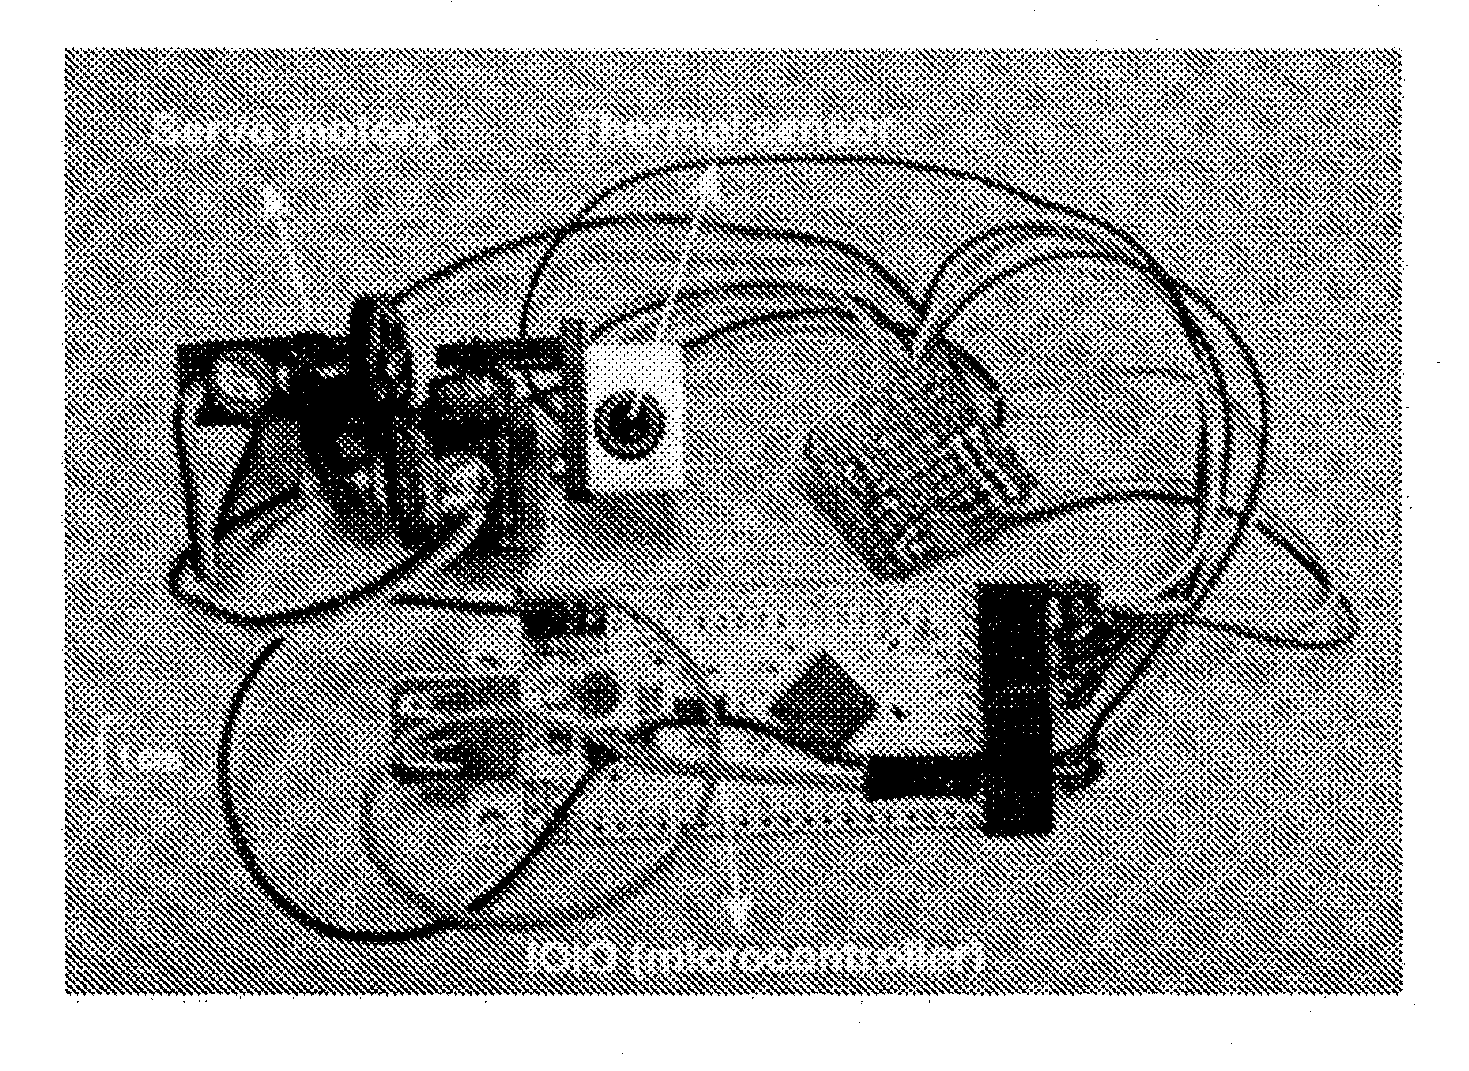 High-resolution thermal imaging system, apparatus, method and computer accessible medium